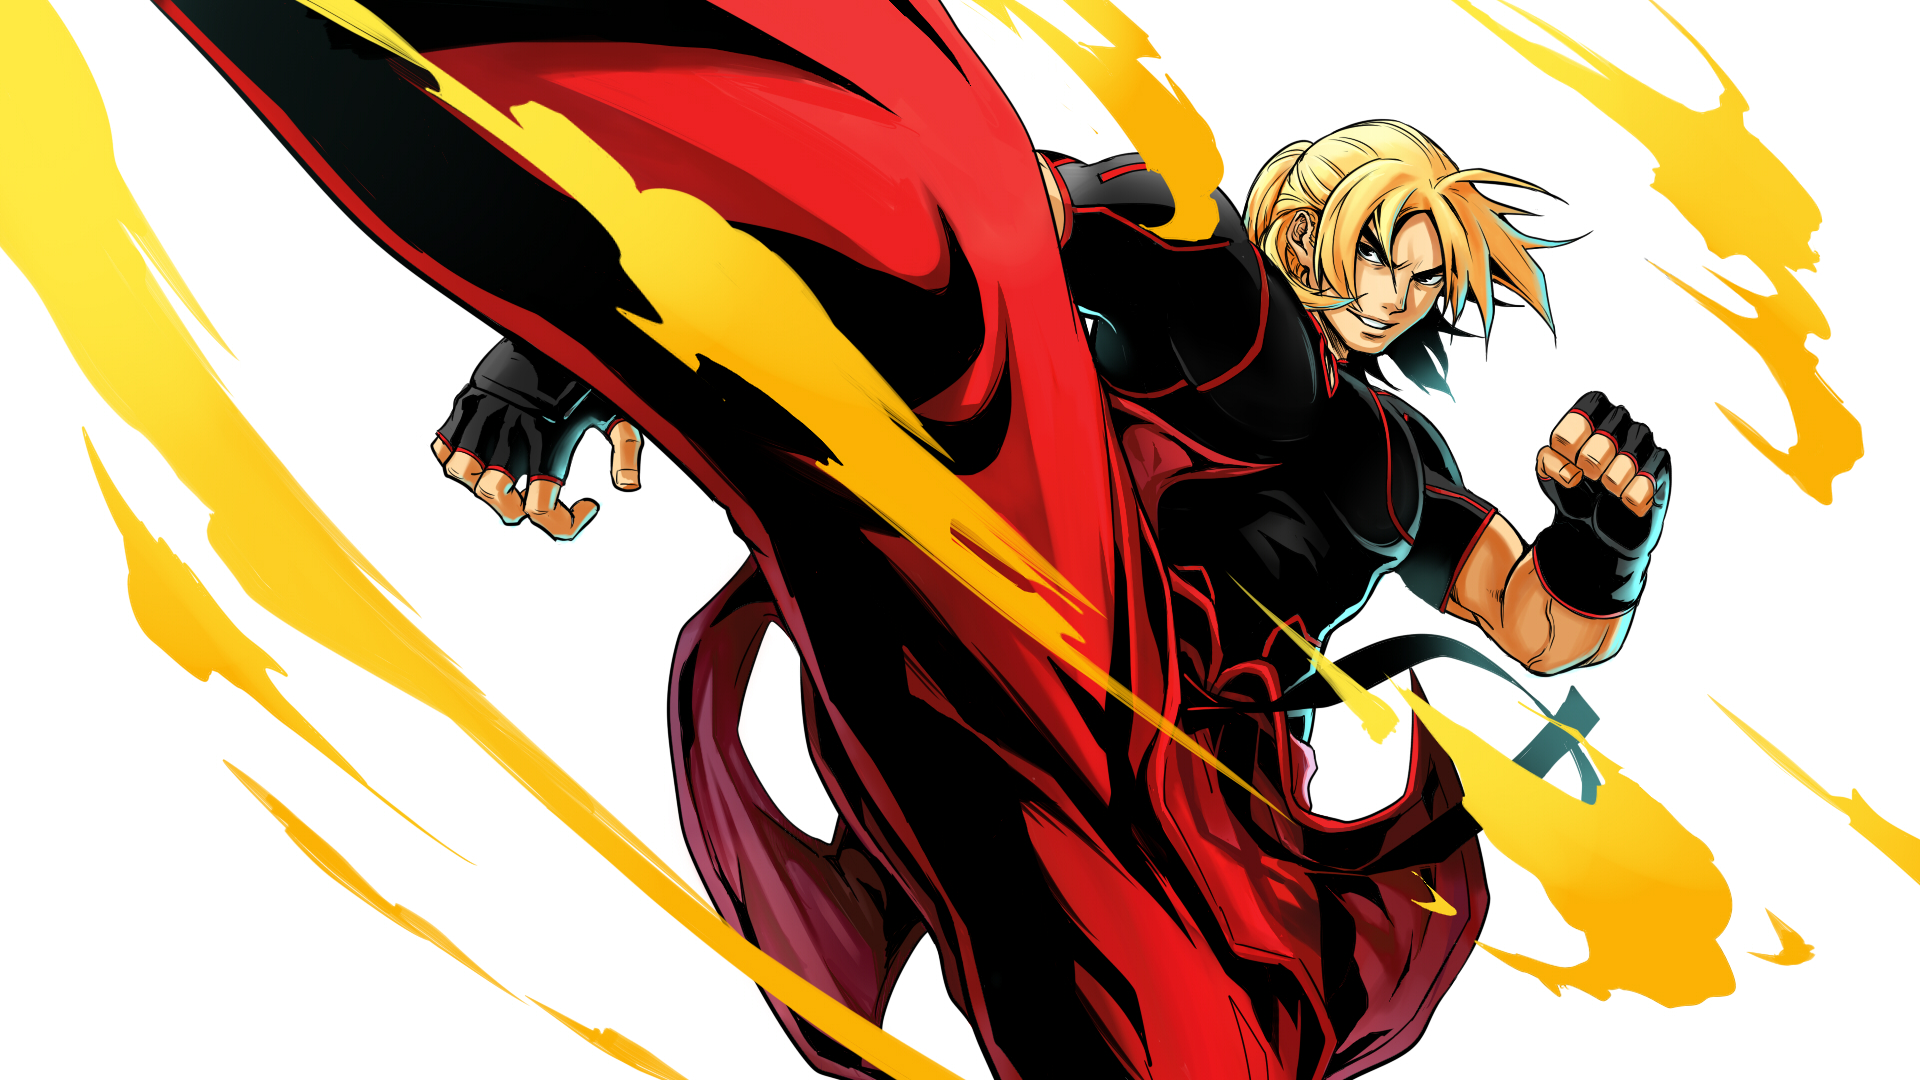 Anime Anime Boys Video Game Characters Video Games Anime Games Street Fighter Ken Masters Short Hair 1920x1080